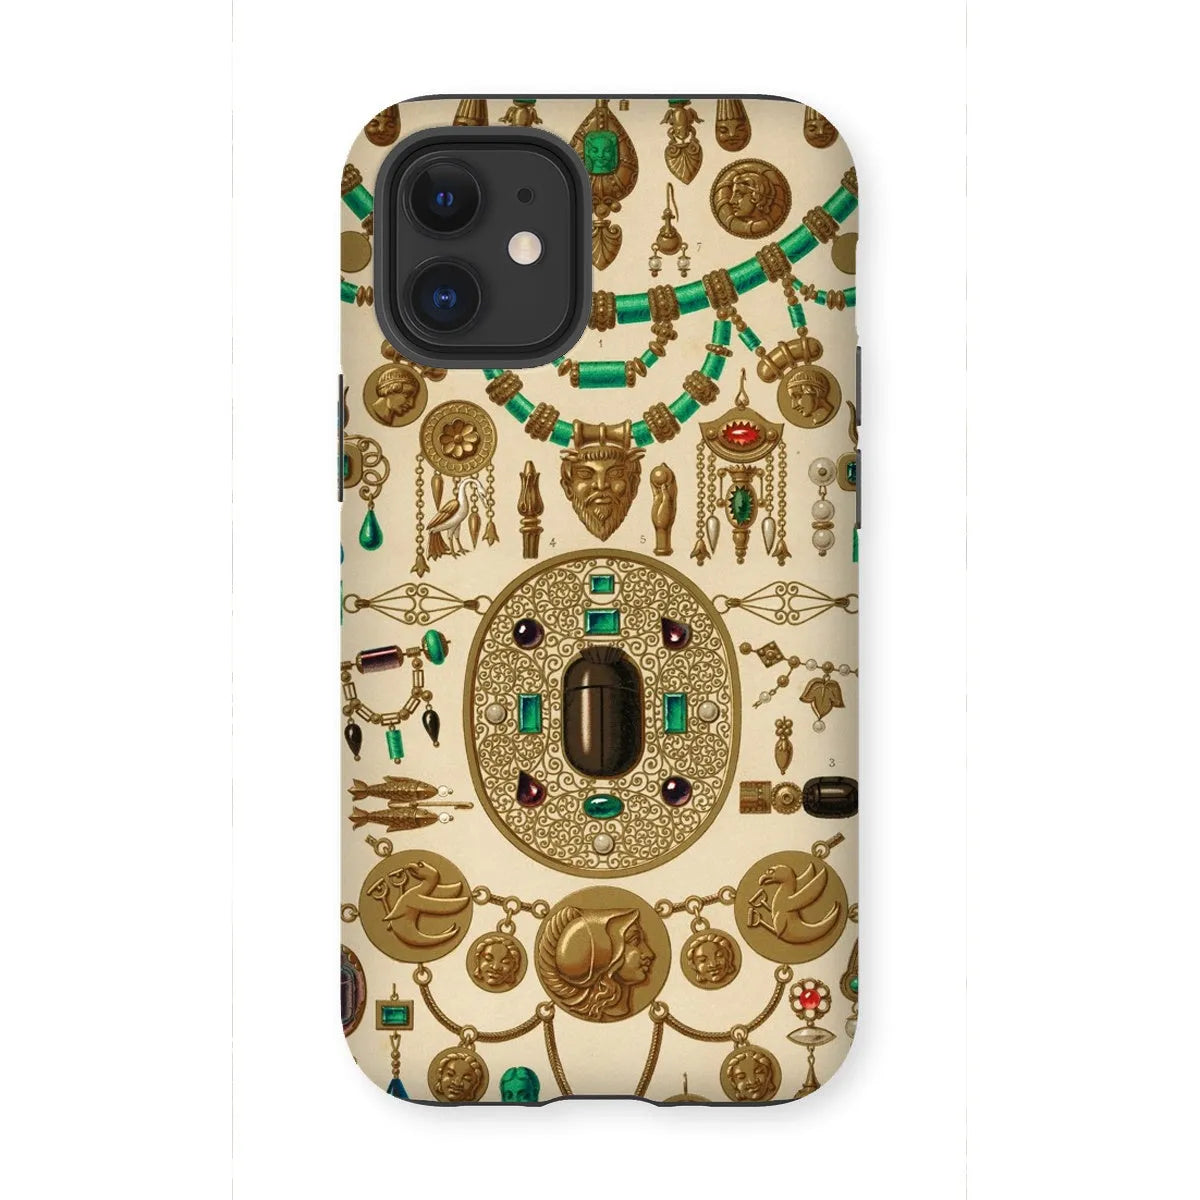 Etruscan Patterns From L’ornement Polychrome By Auguste Racinet Tough Phone Case - Iphone 12 Mini / Matte - Mobile